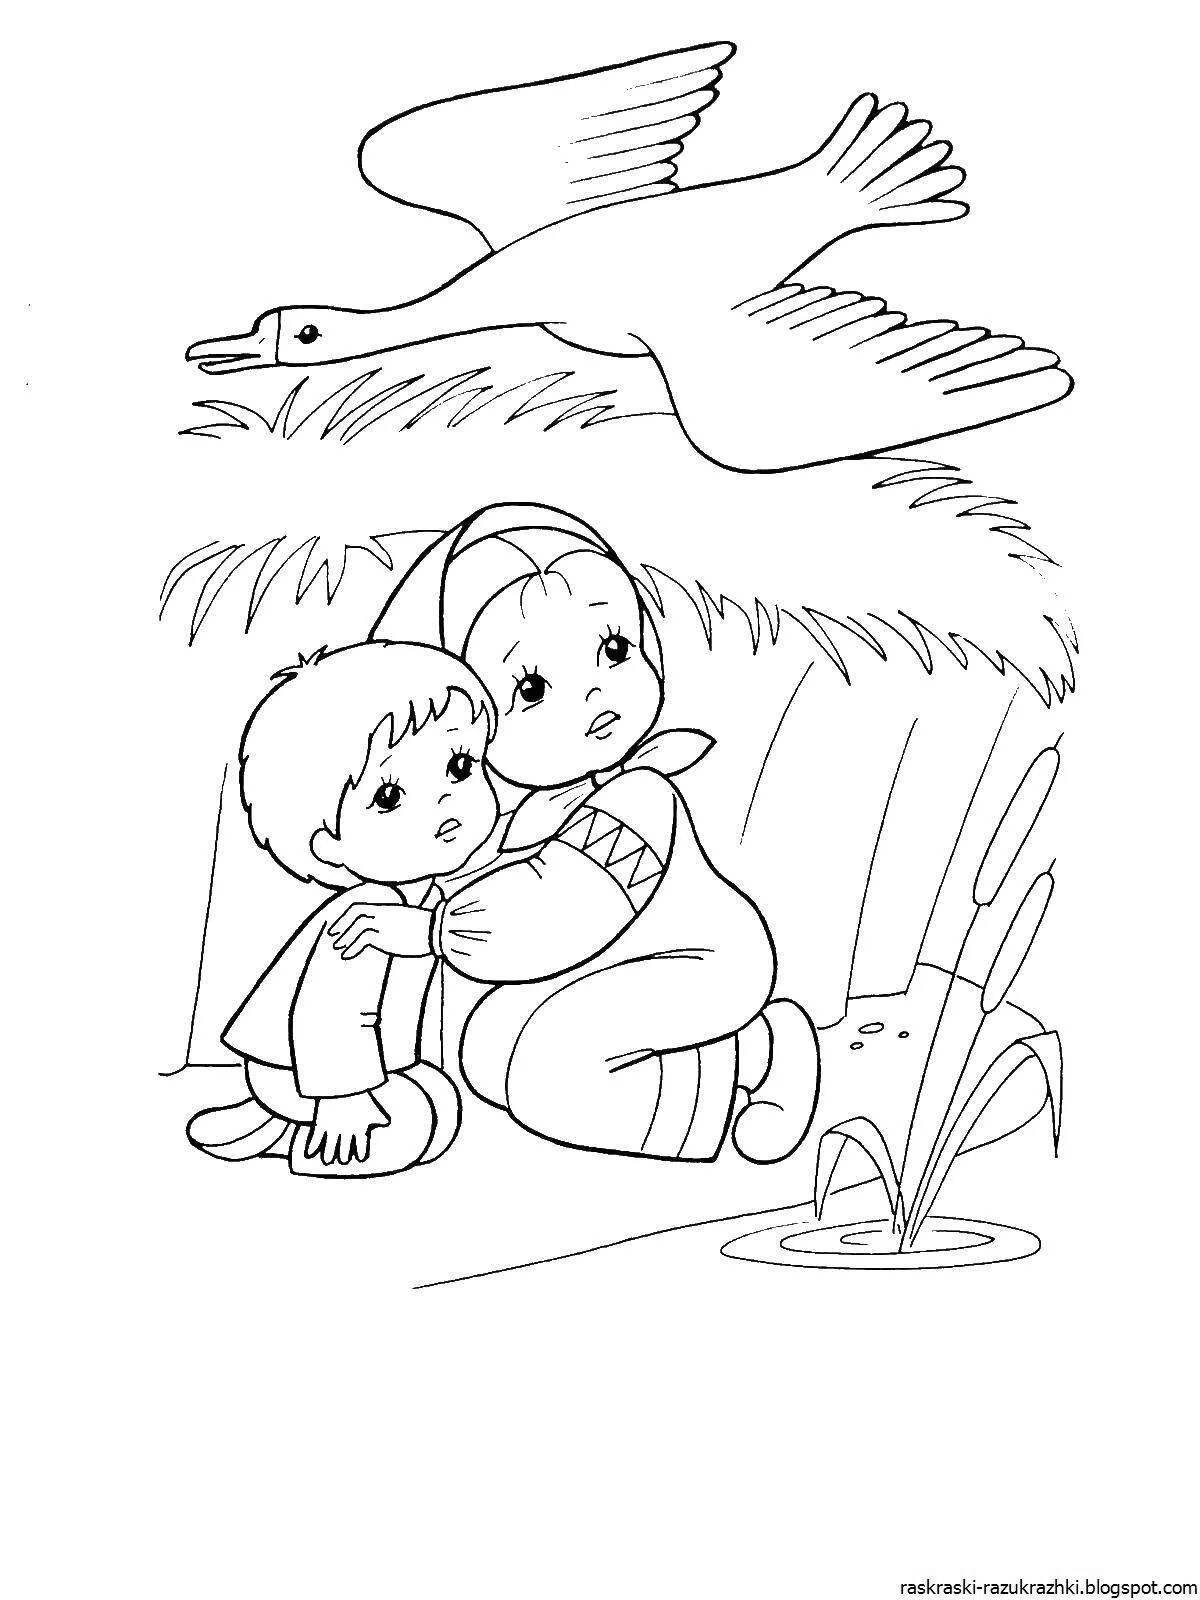 Live swan geese coloring pages for kids